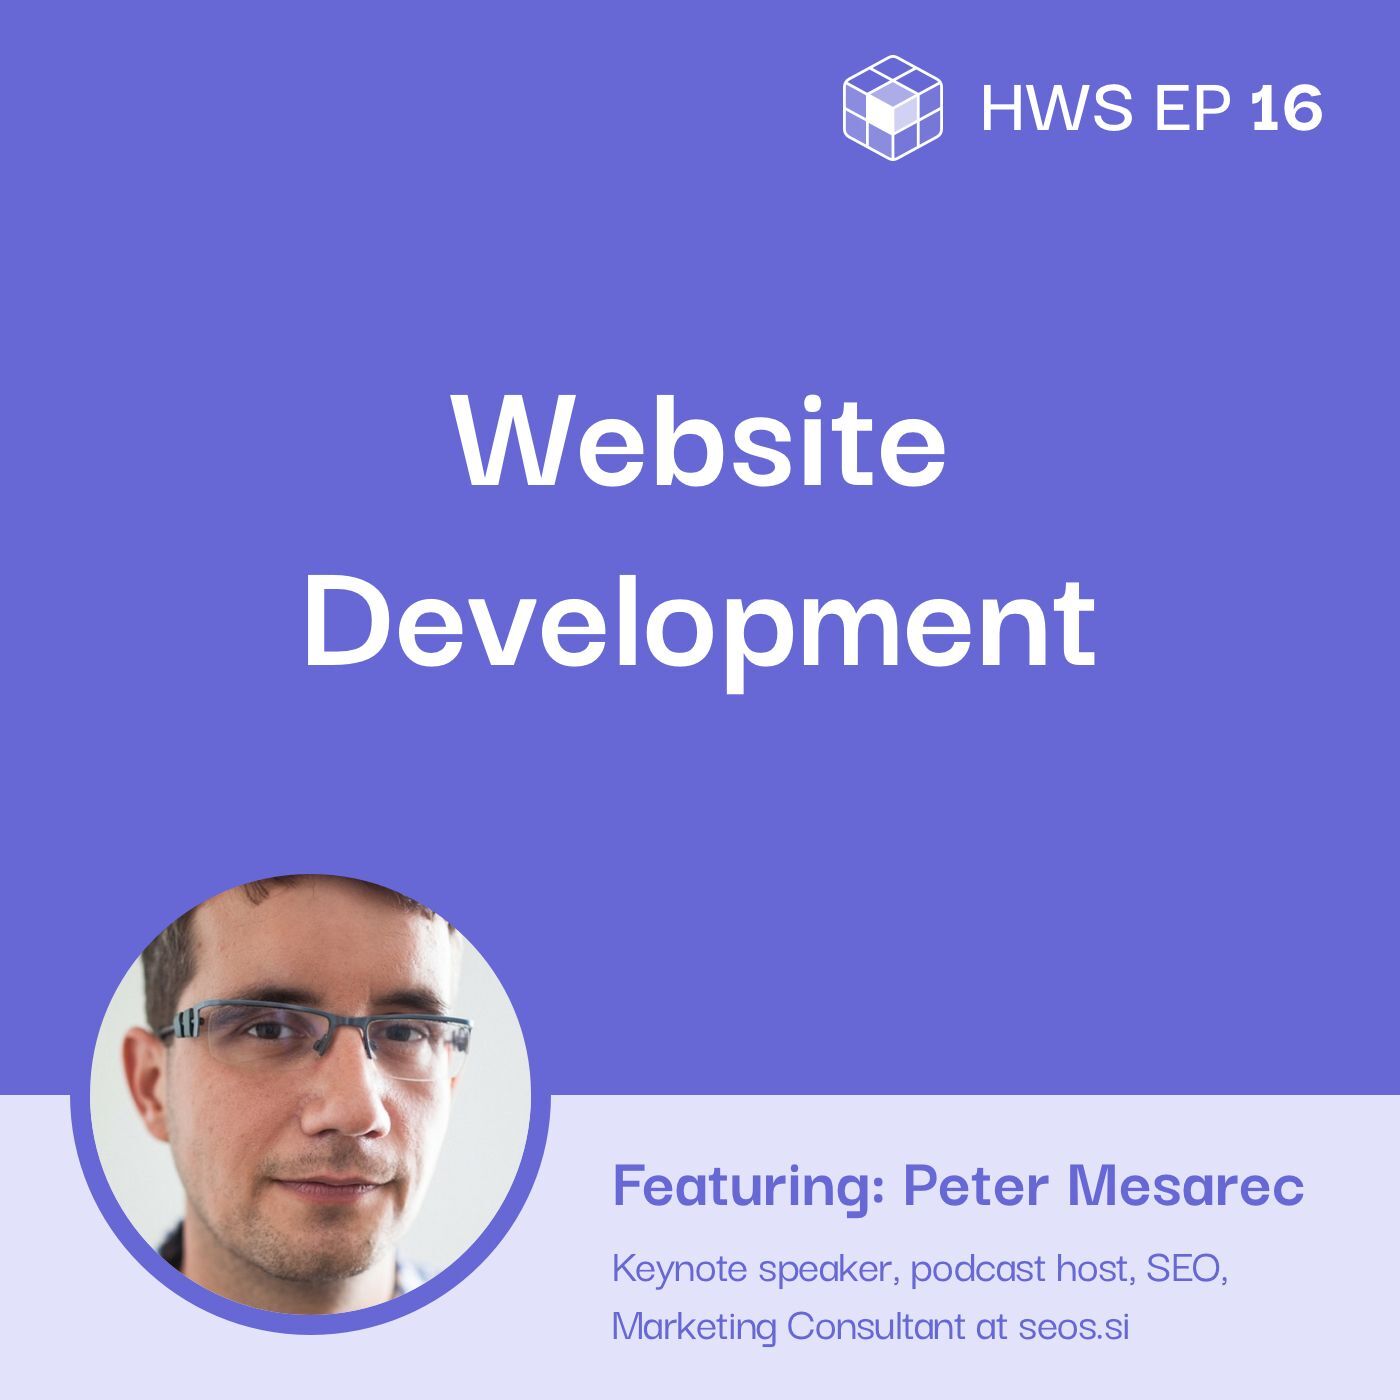 Peter Meserec shares how to make sure your web development process is on track and how to drive traffic to new websites